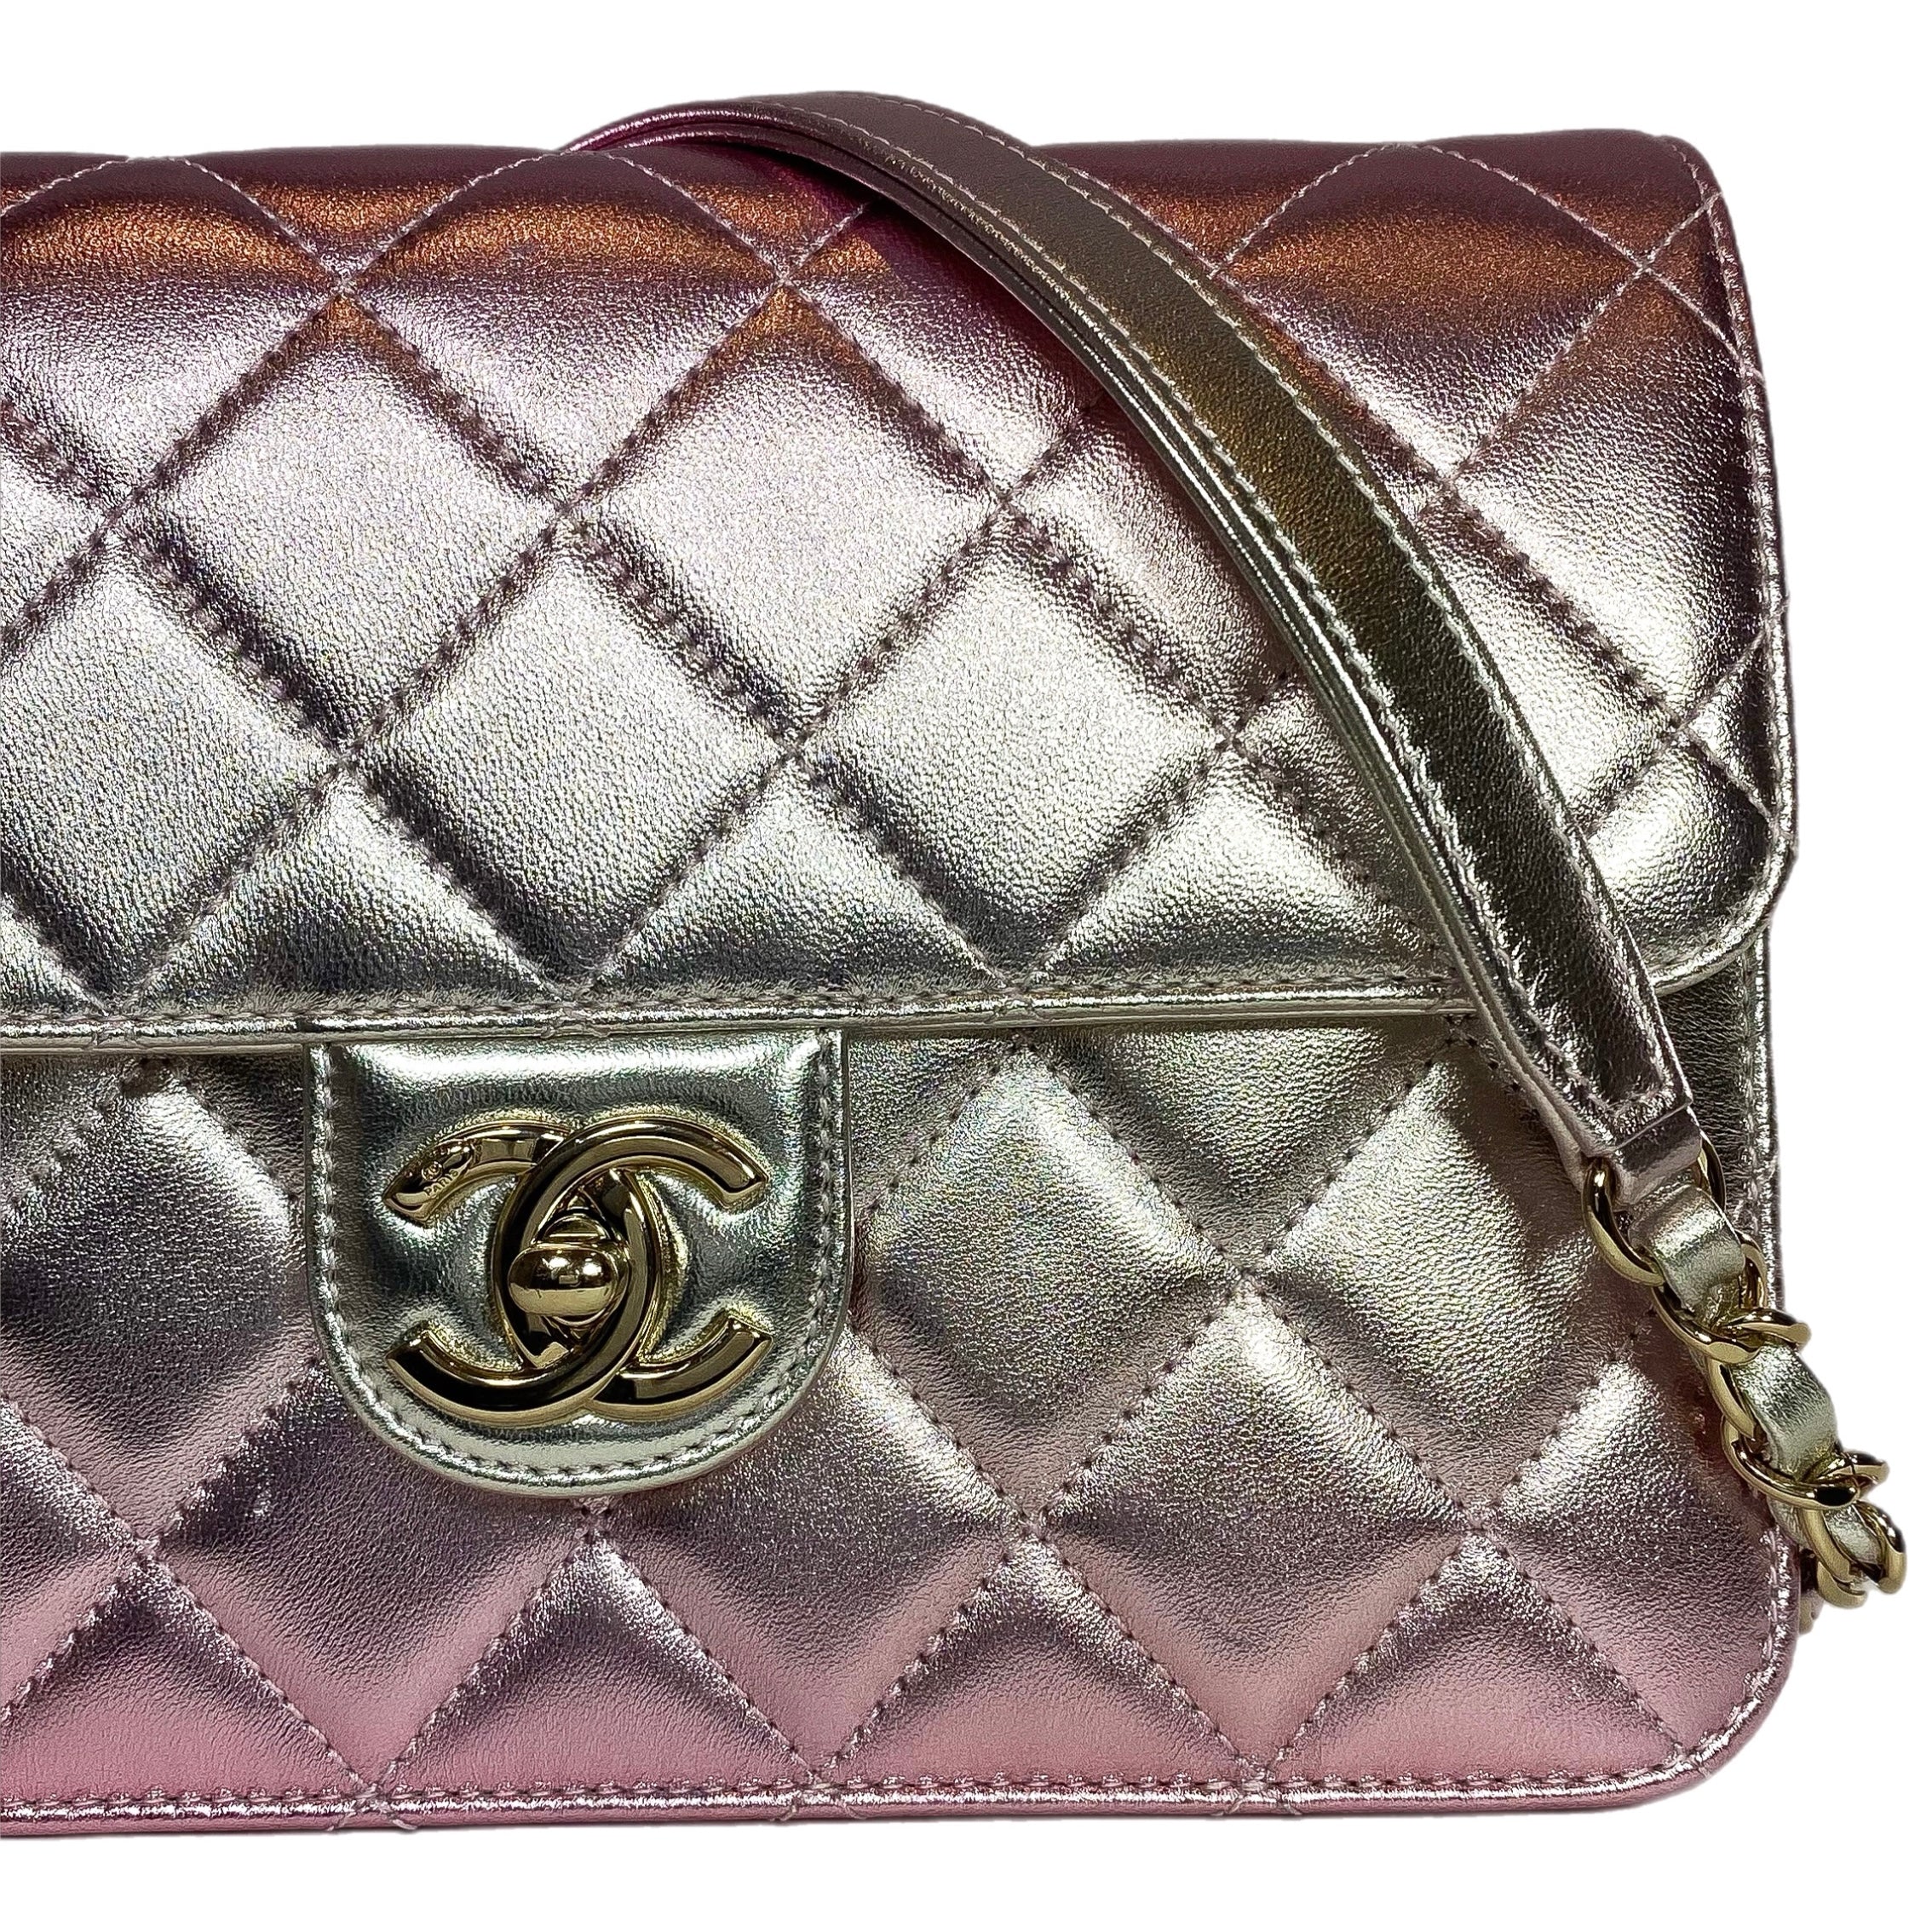 Chanel Like A Wallet Pink Gradient Metallic Quilted Flap Bag